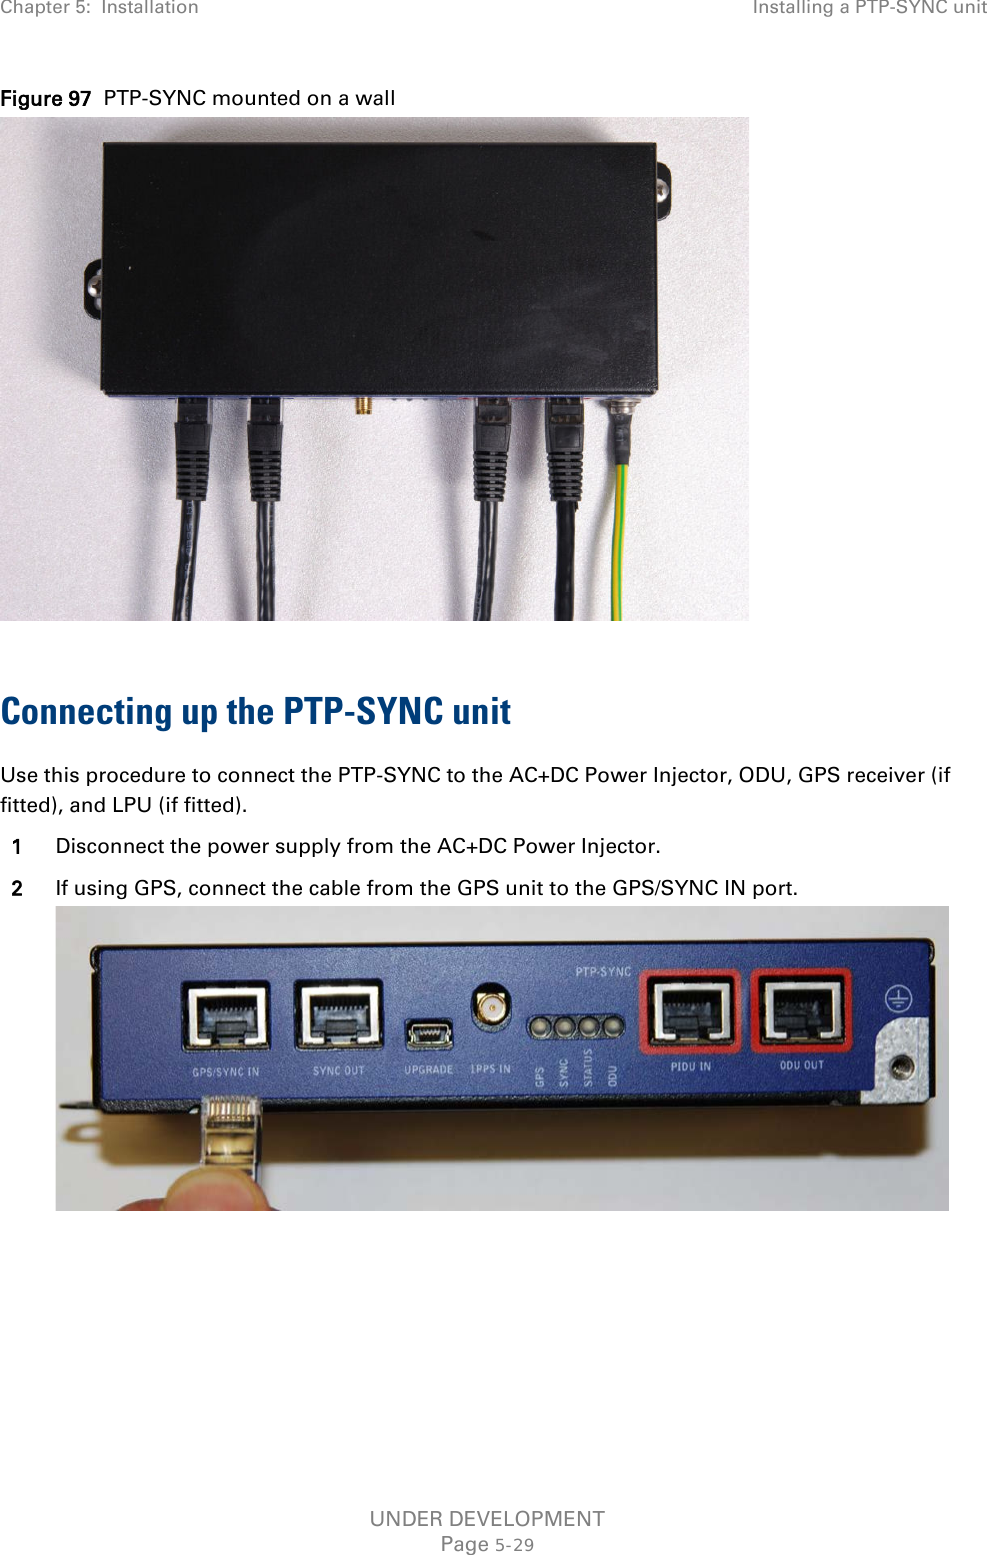 Chapter 5:  Installation Installing a PTP-SYNC unit  Figure 97  PTP-SYNC mounted on a wall   Connecting up the PTP-SYNC unit Use this procedure to connect the PTP-SYNC to the AC+DC Power Injector, ODU, GPS receiver (if fitted), and LPU (if fitted). 1 Disconnect the power supply from the AC+DC Power Injector. 2 If using GPS, connect the cable from the GPS unit to the GPS/SYNC IN port.  UNDER DEVELOPMENT Page 5-29 